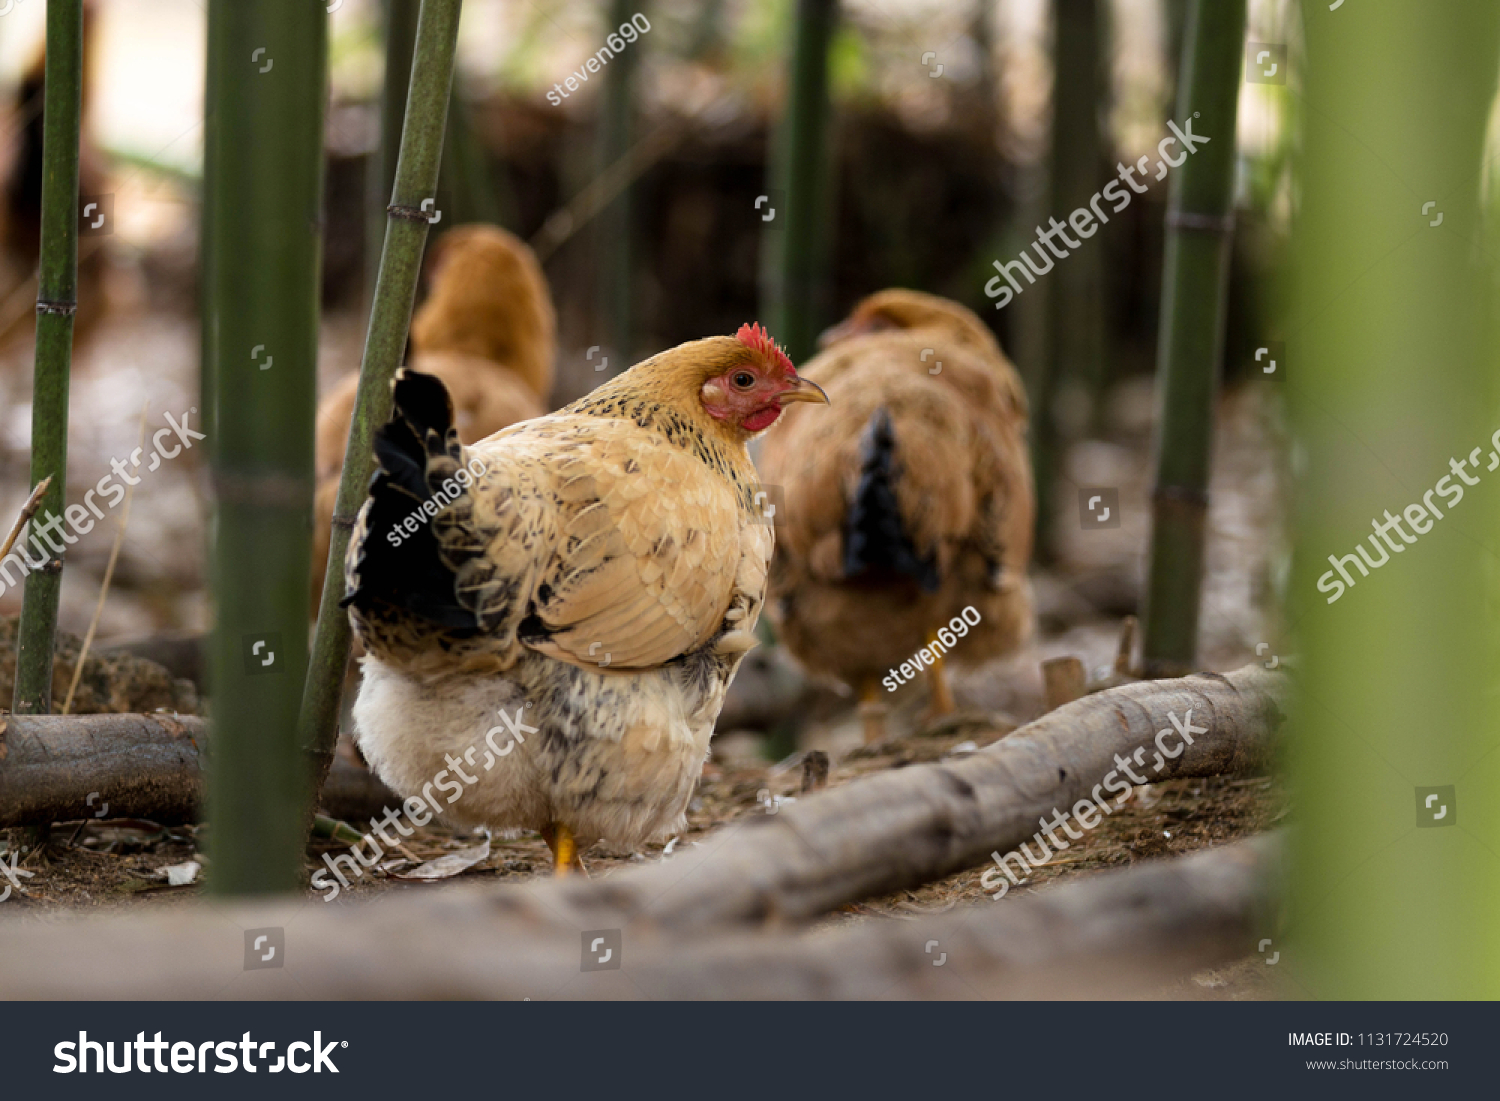 A group of hens that feeds in a bamboo forest #1131724520